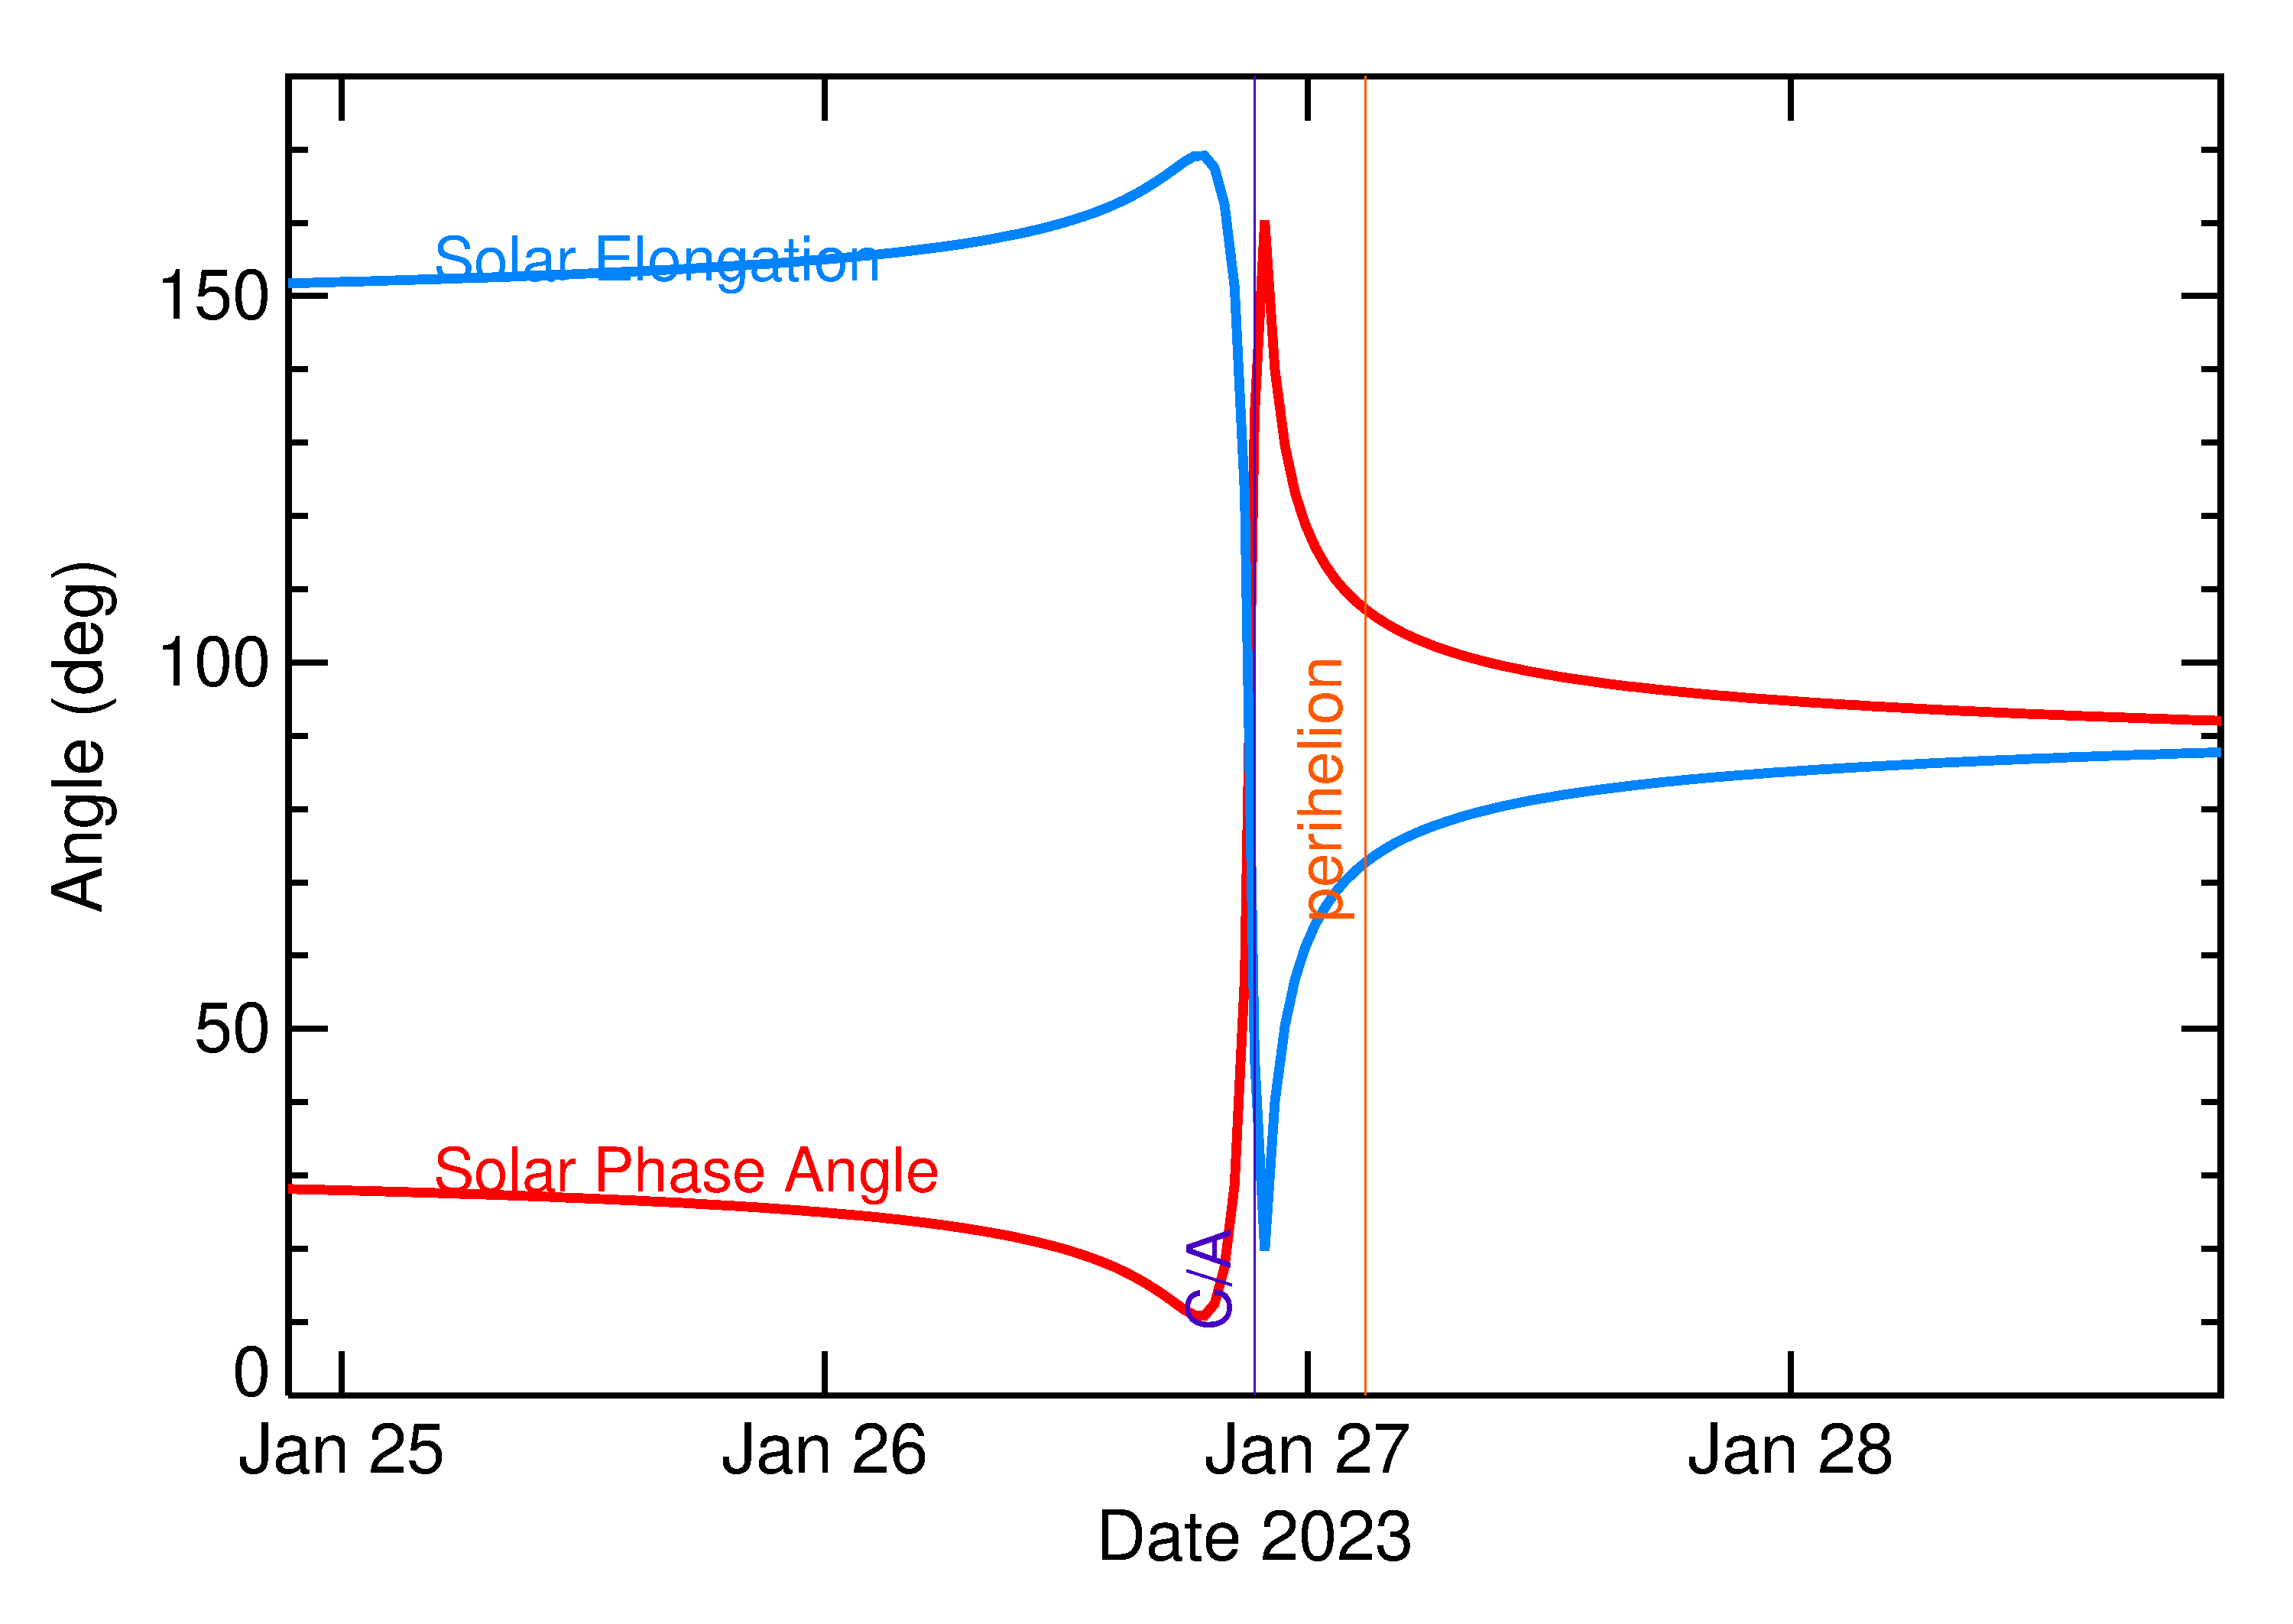 Solar Elongation and Solar Phase Angle of 2023 BU in the days around closest approach